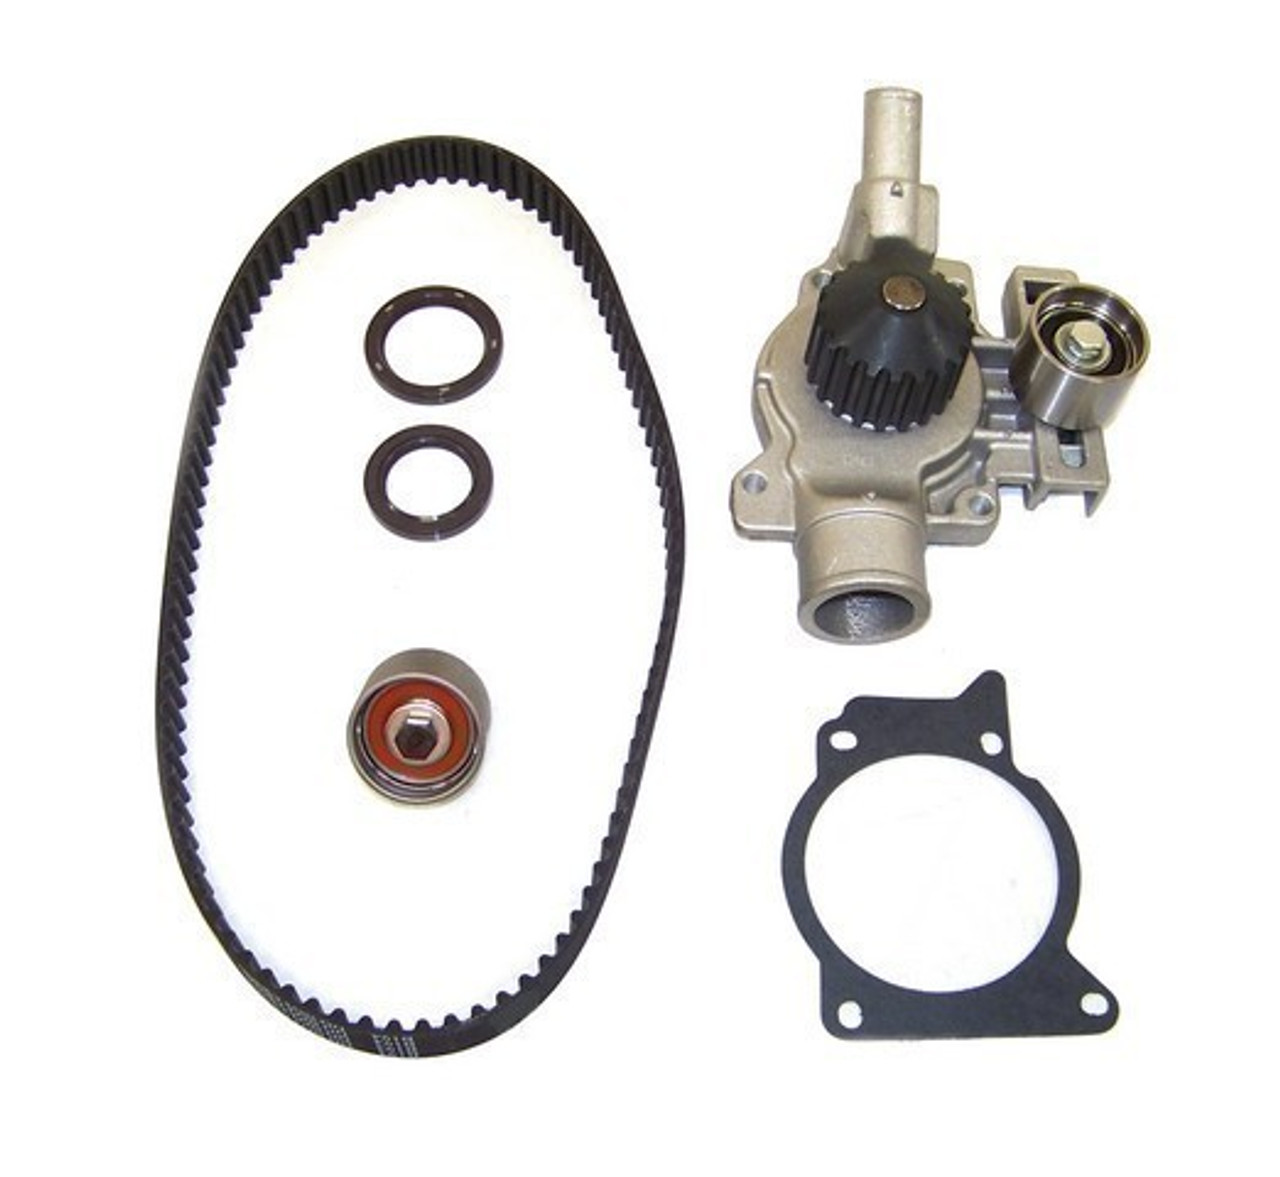 1993 Mercury Tracer 1.9L Engine Timing Belt Kit with Water Pump TBK4125WP -7